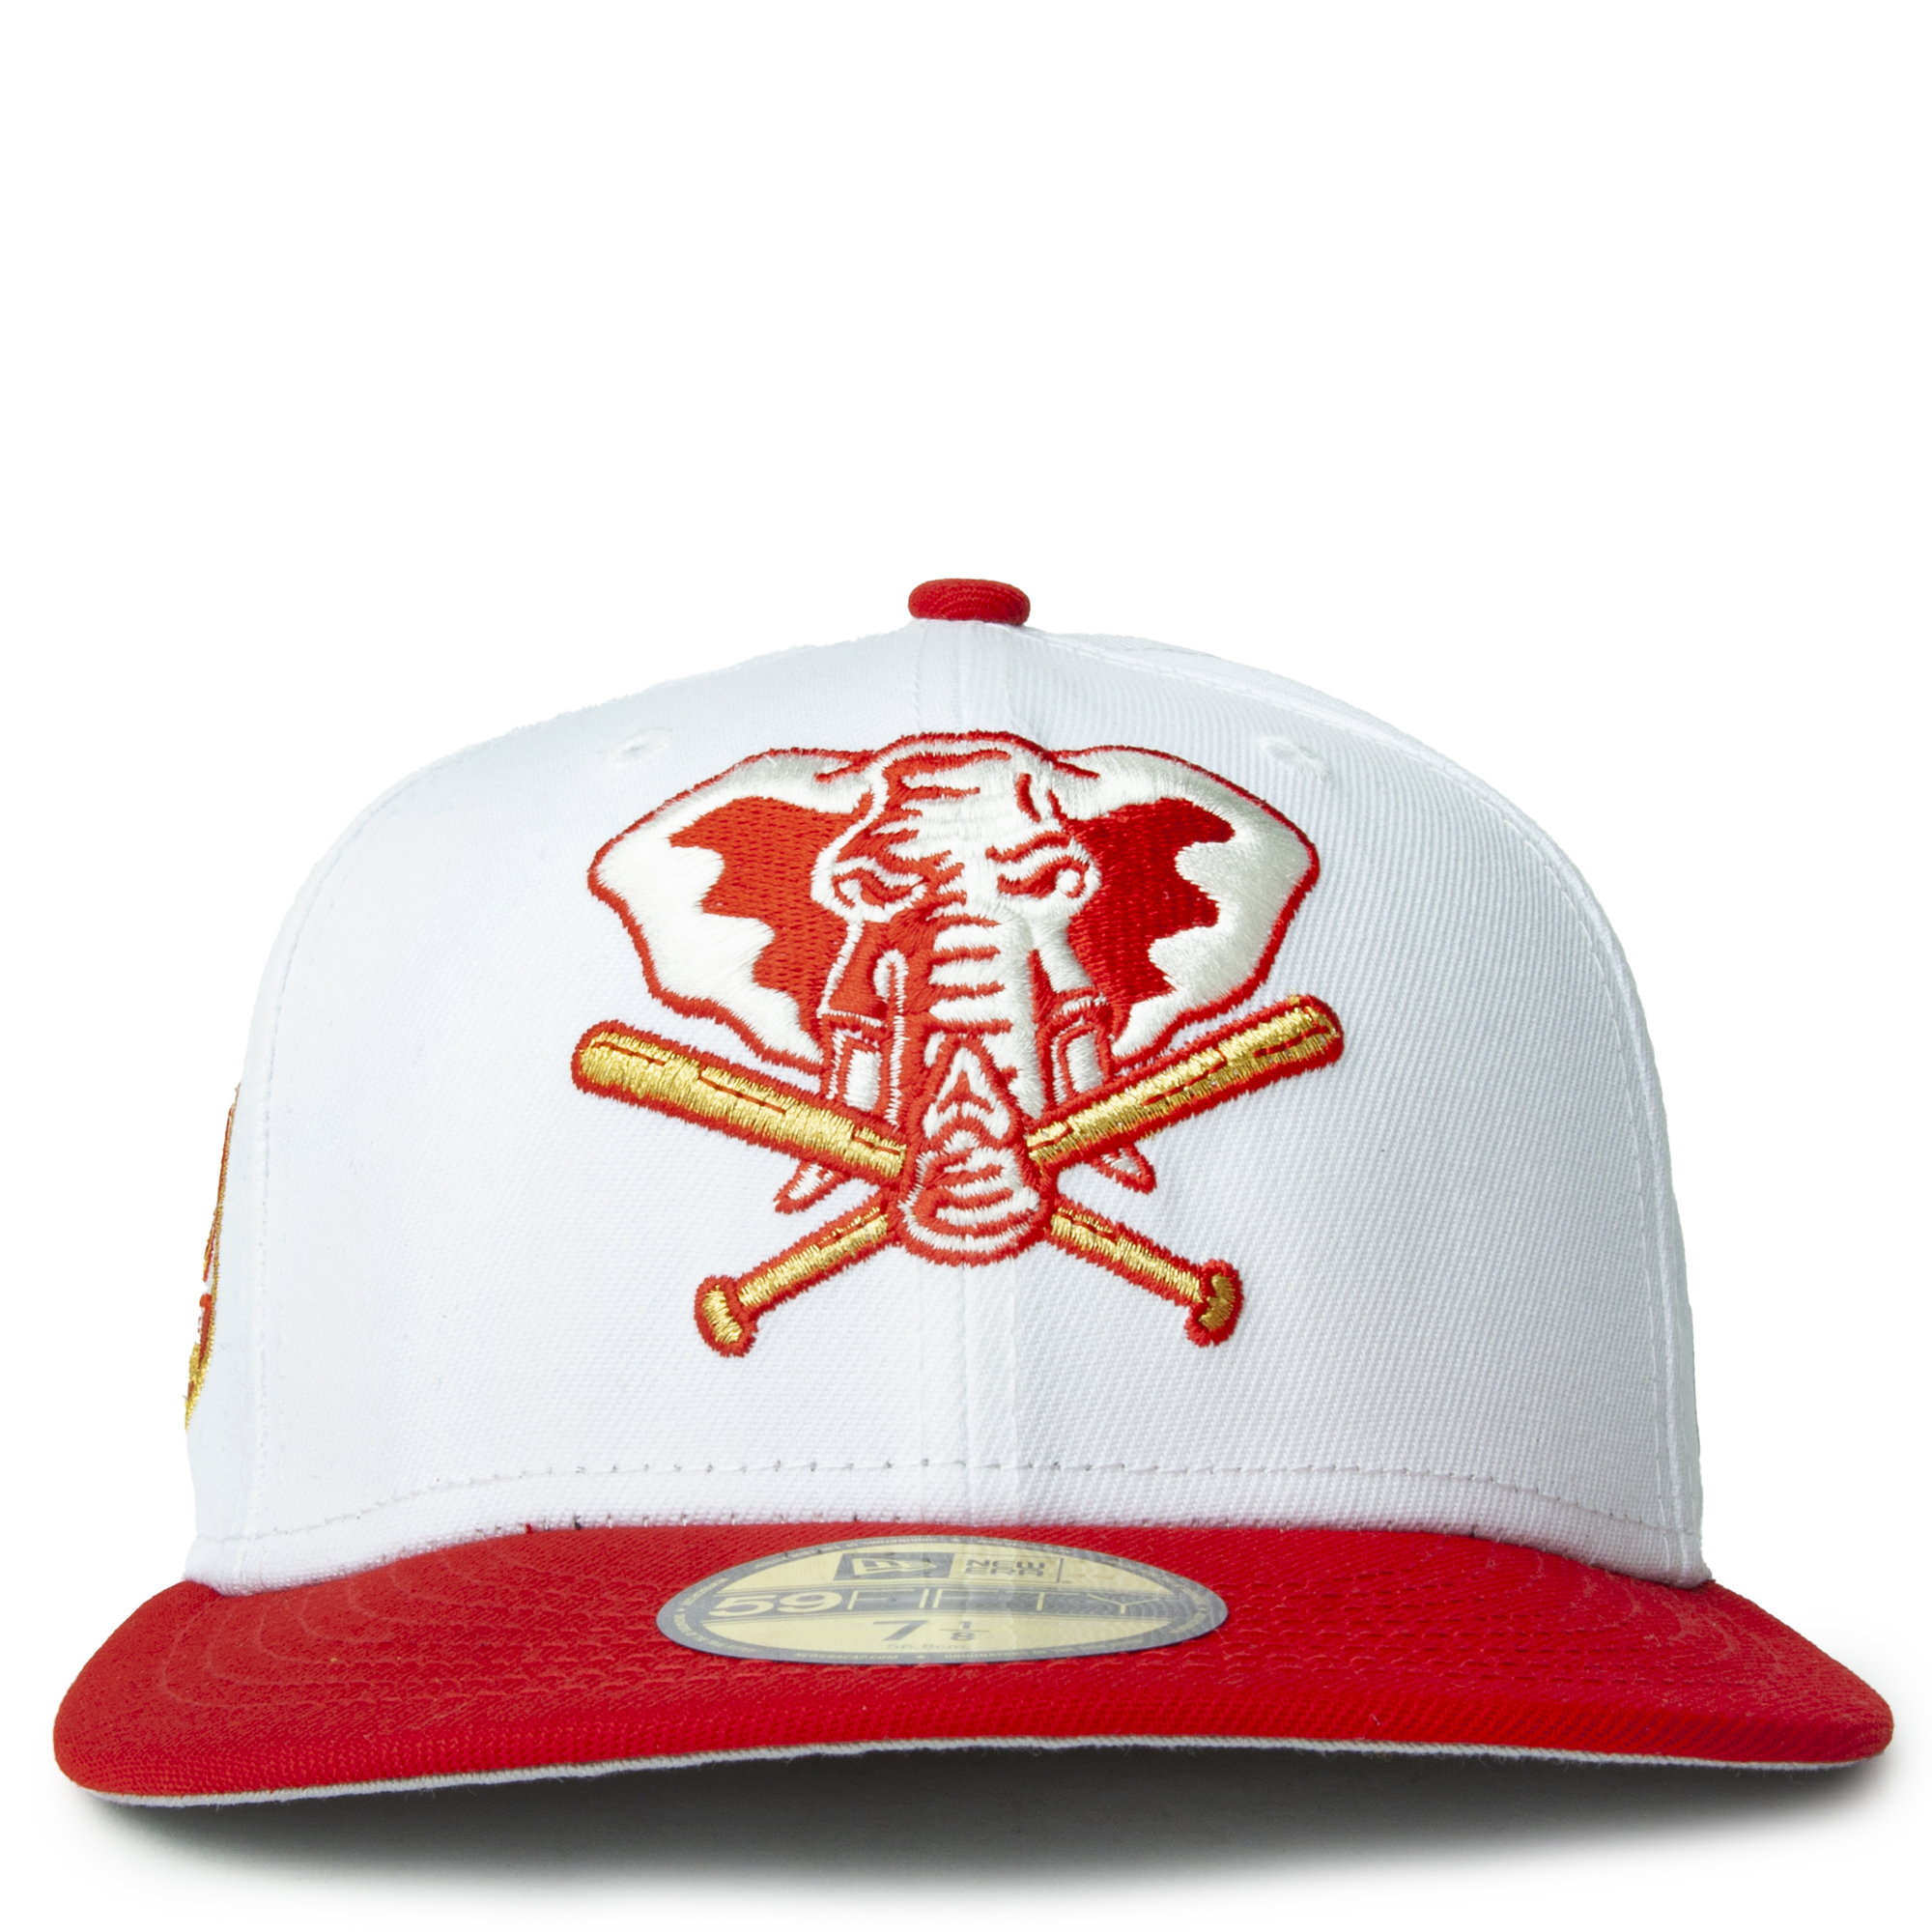 Oakland Athletics New Era White on White 59FIFTY Fitted Hat